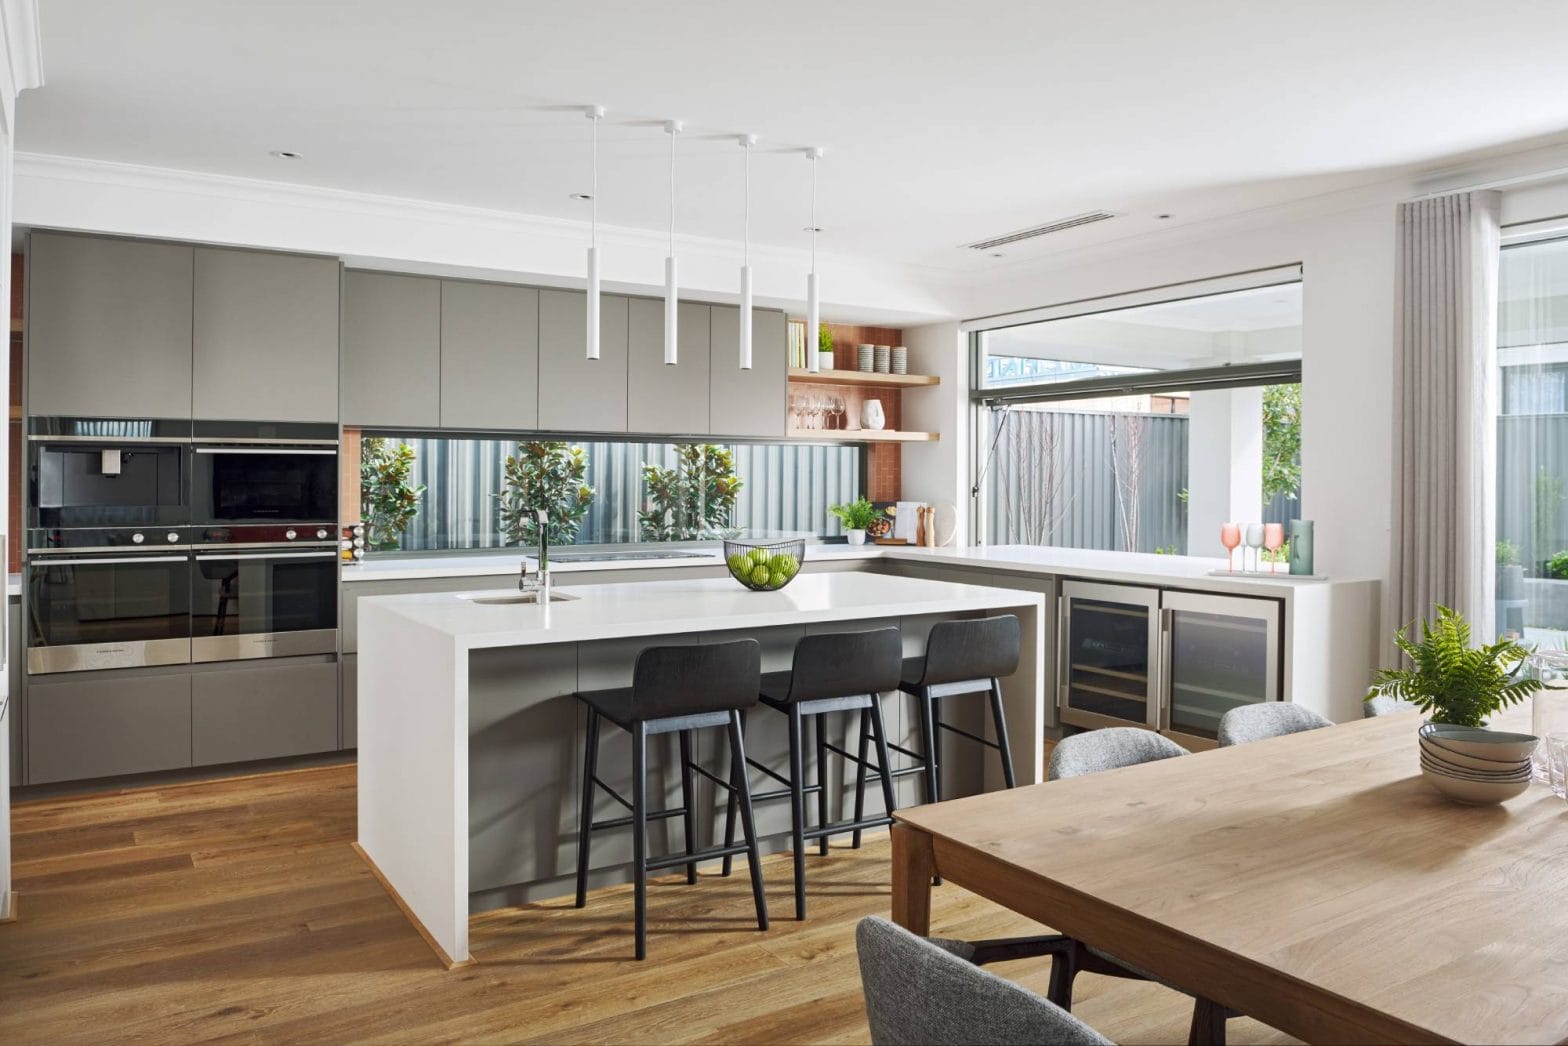 4 SIGNS OF A WELL-DESIGNED KITCHEN